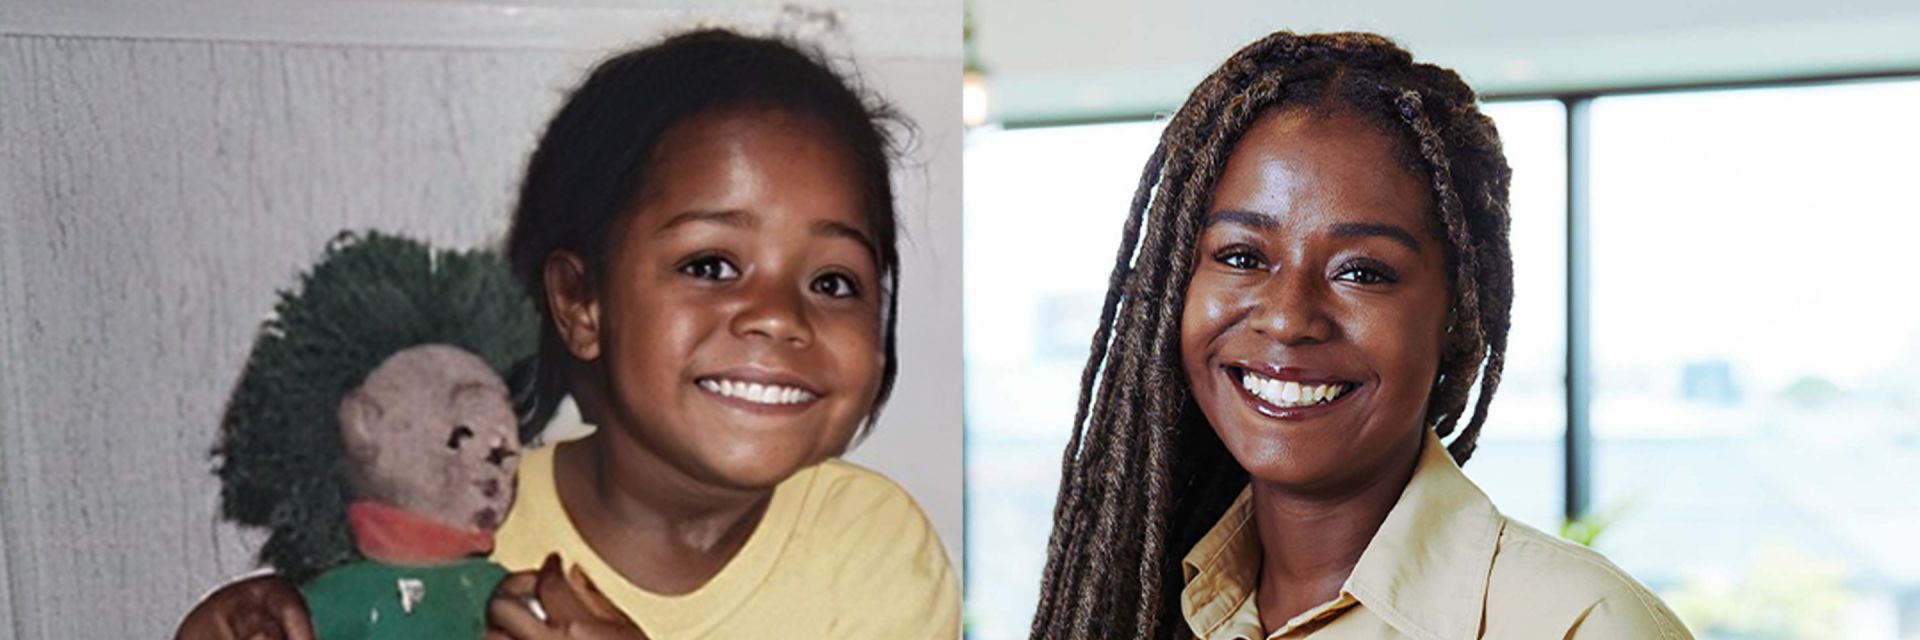 From left to right, Natalie Ojevah MBE pictured as a child and as an adult.